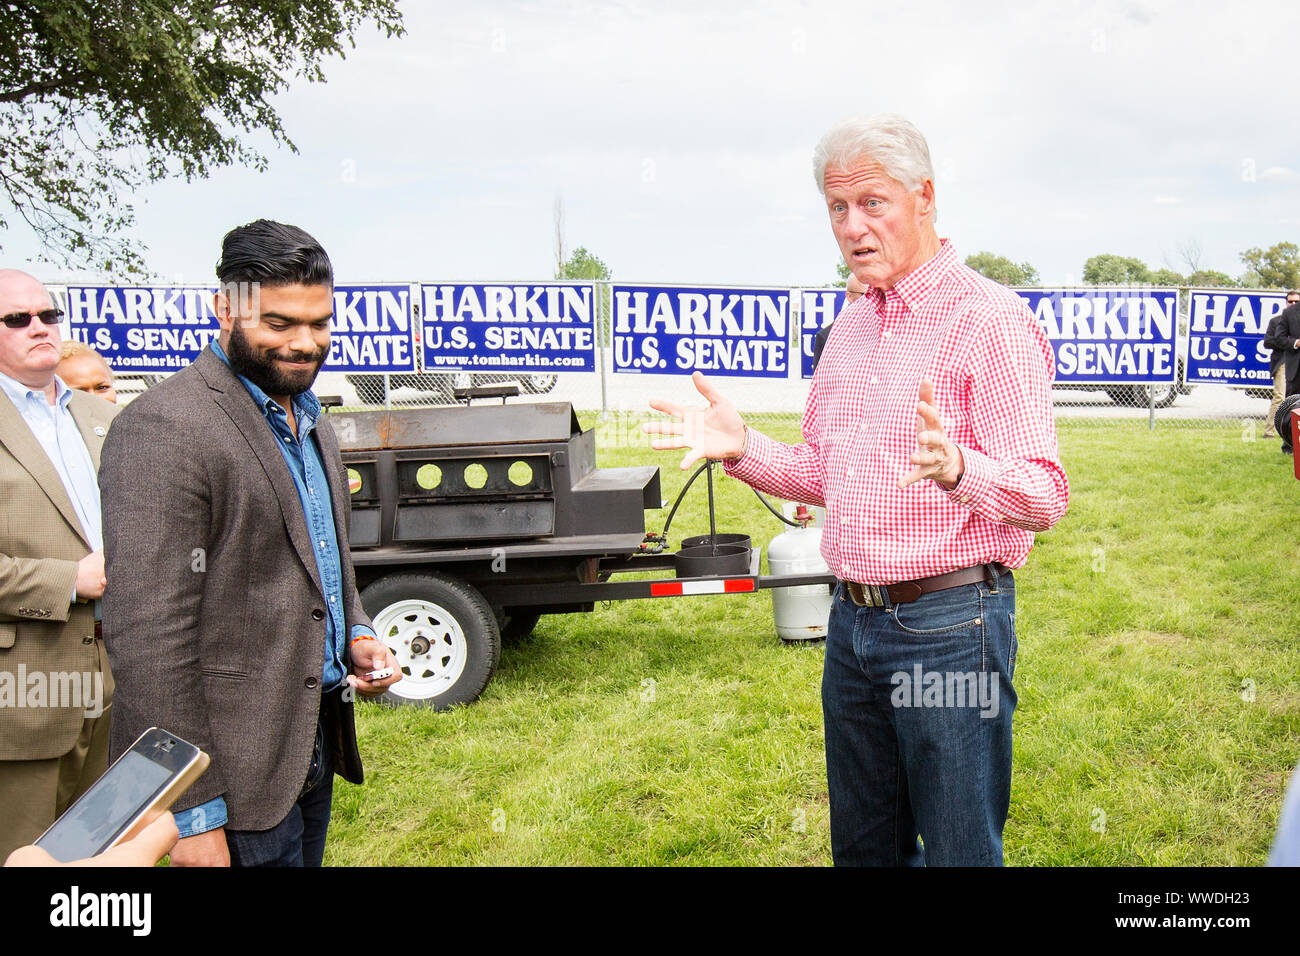 Former US President Bill Clinton at the annual barbeque party hosted by Iowa Senator Tom Harkins. Speculations ran high that Hillary Rodham Clinton would announce her candidacy for President 2016. Stock Photo